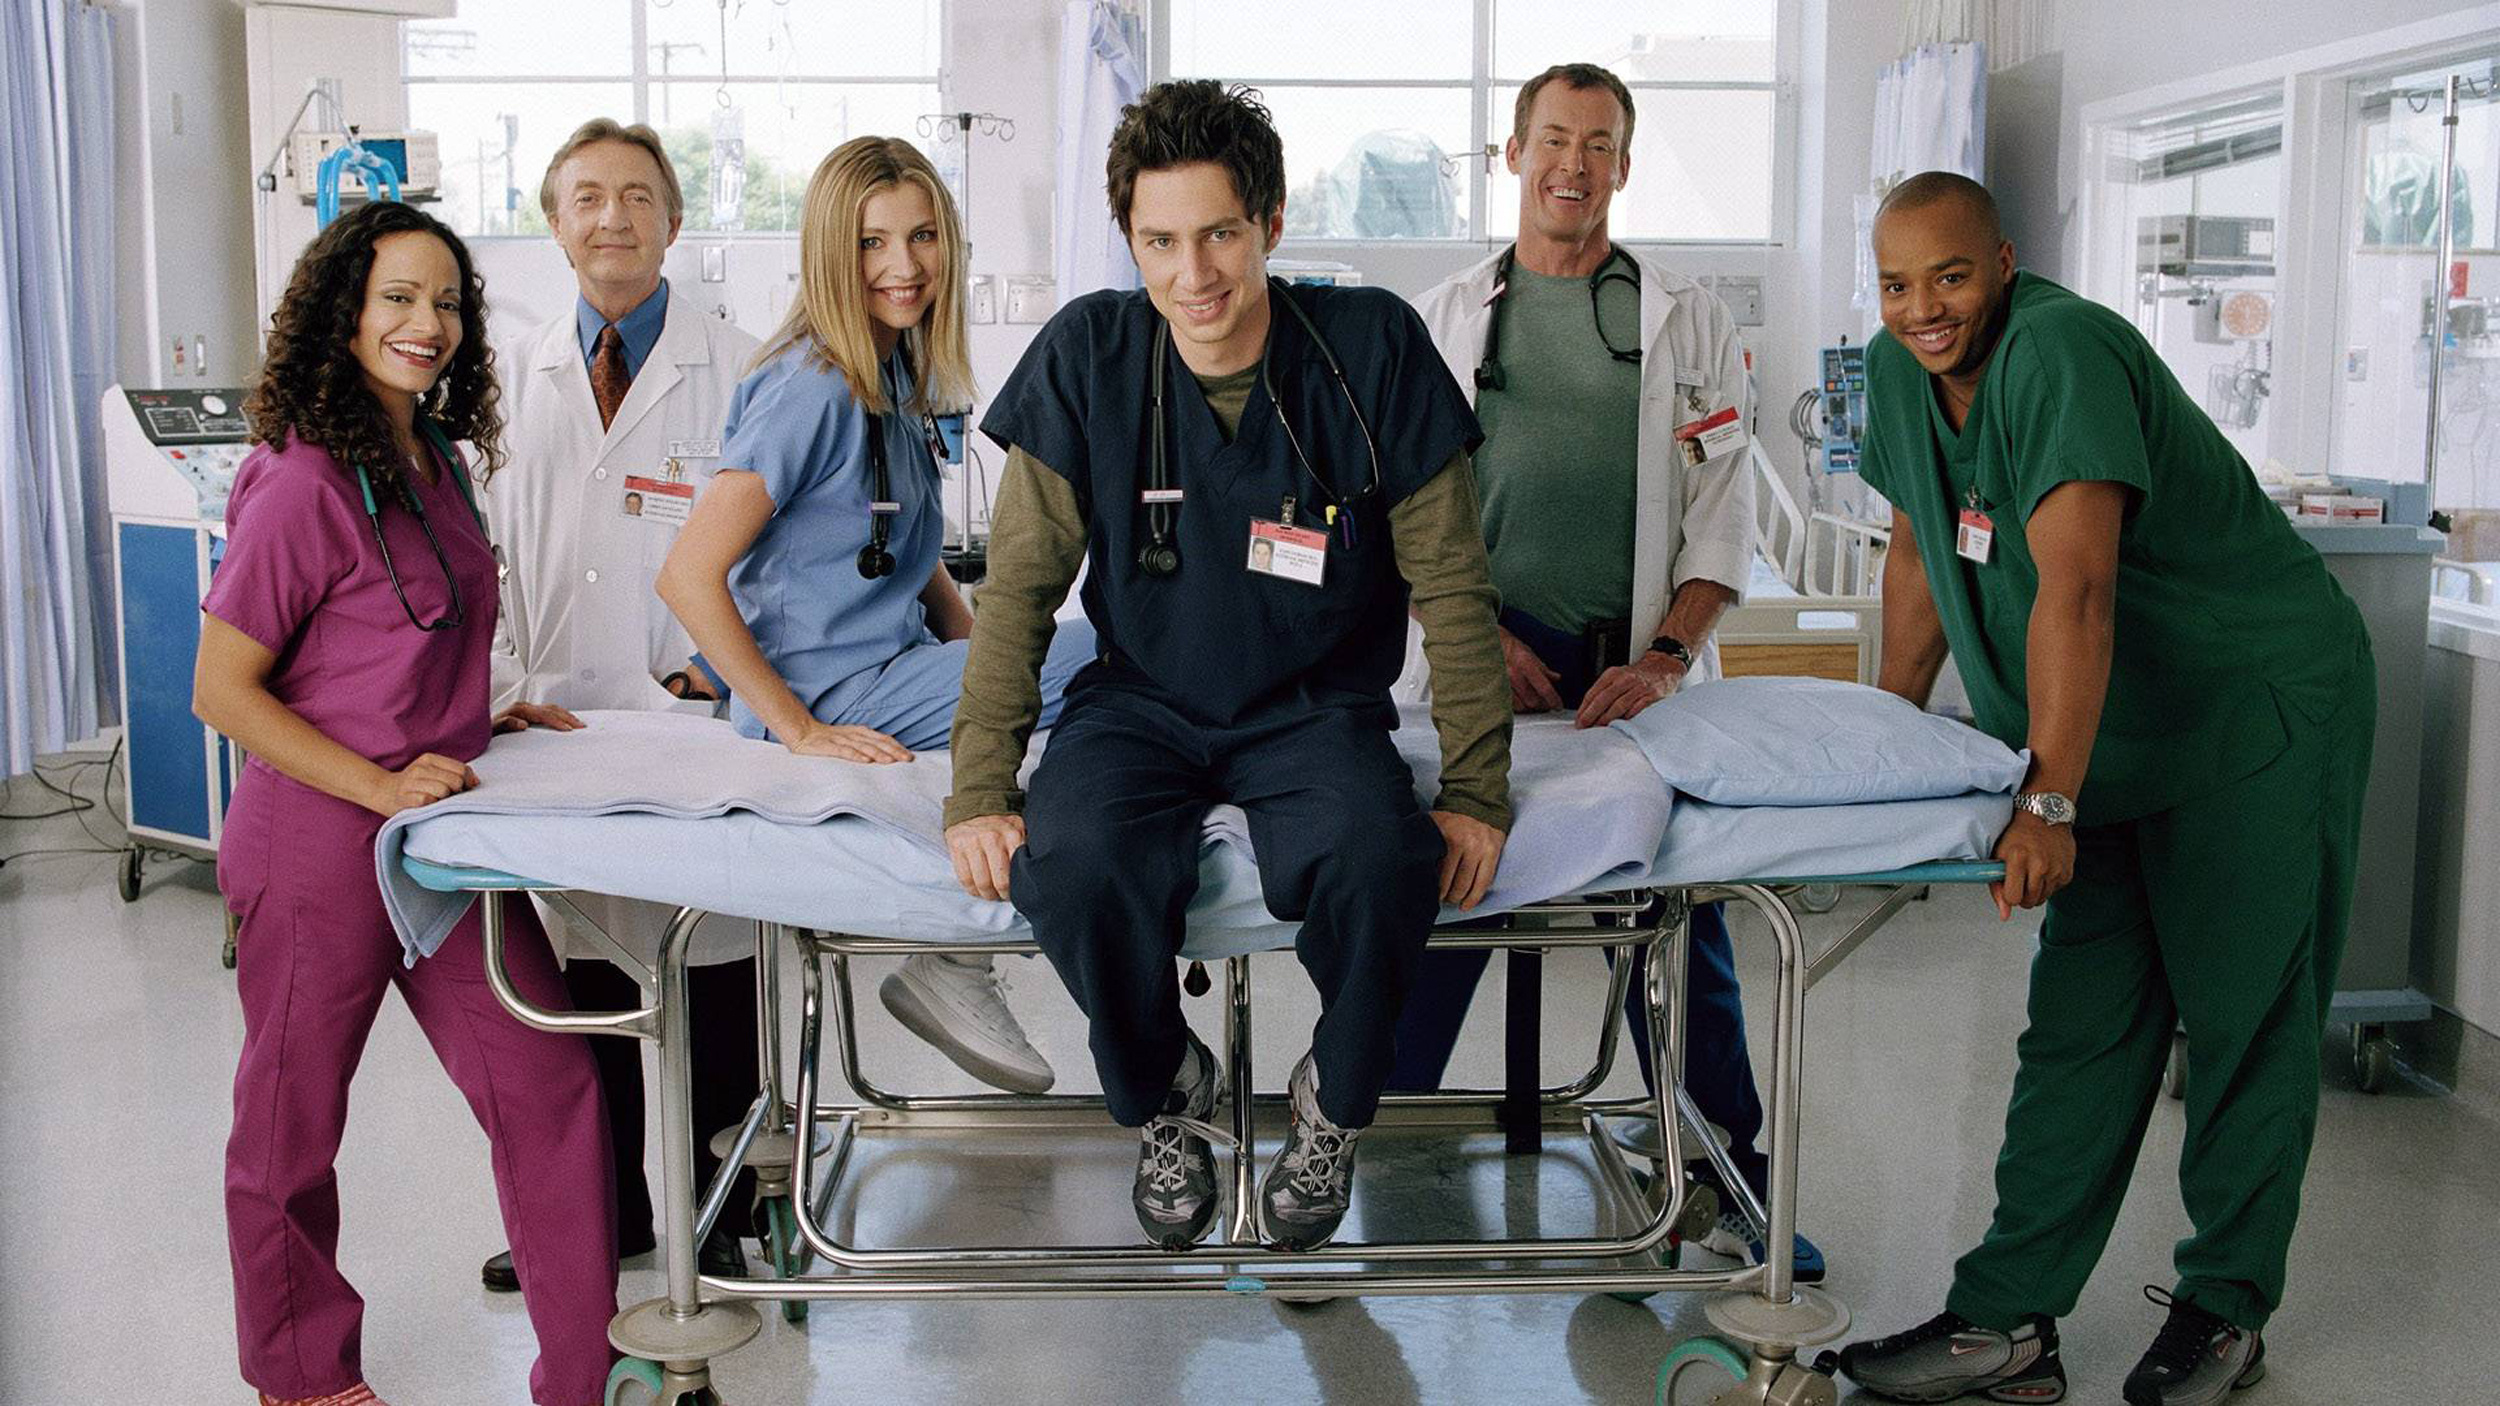 Donald Faison: The leading characters of a popular American medical sitcom, Scrubs. 2500x1410 HD Wallpaper.